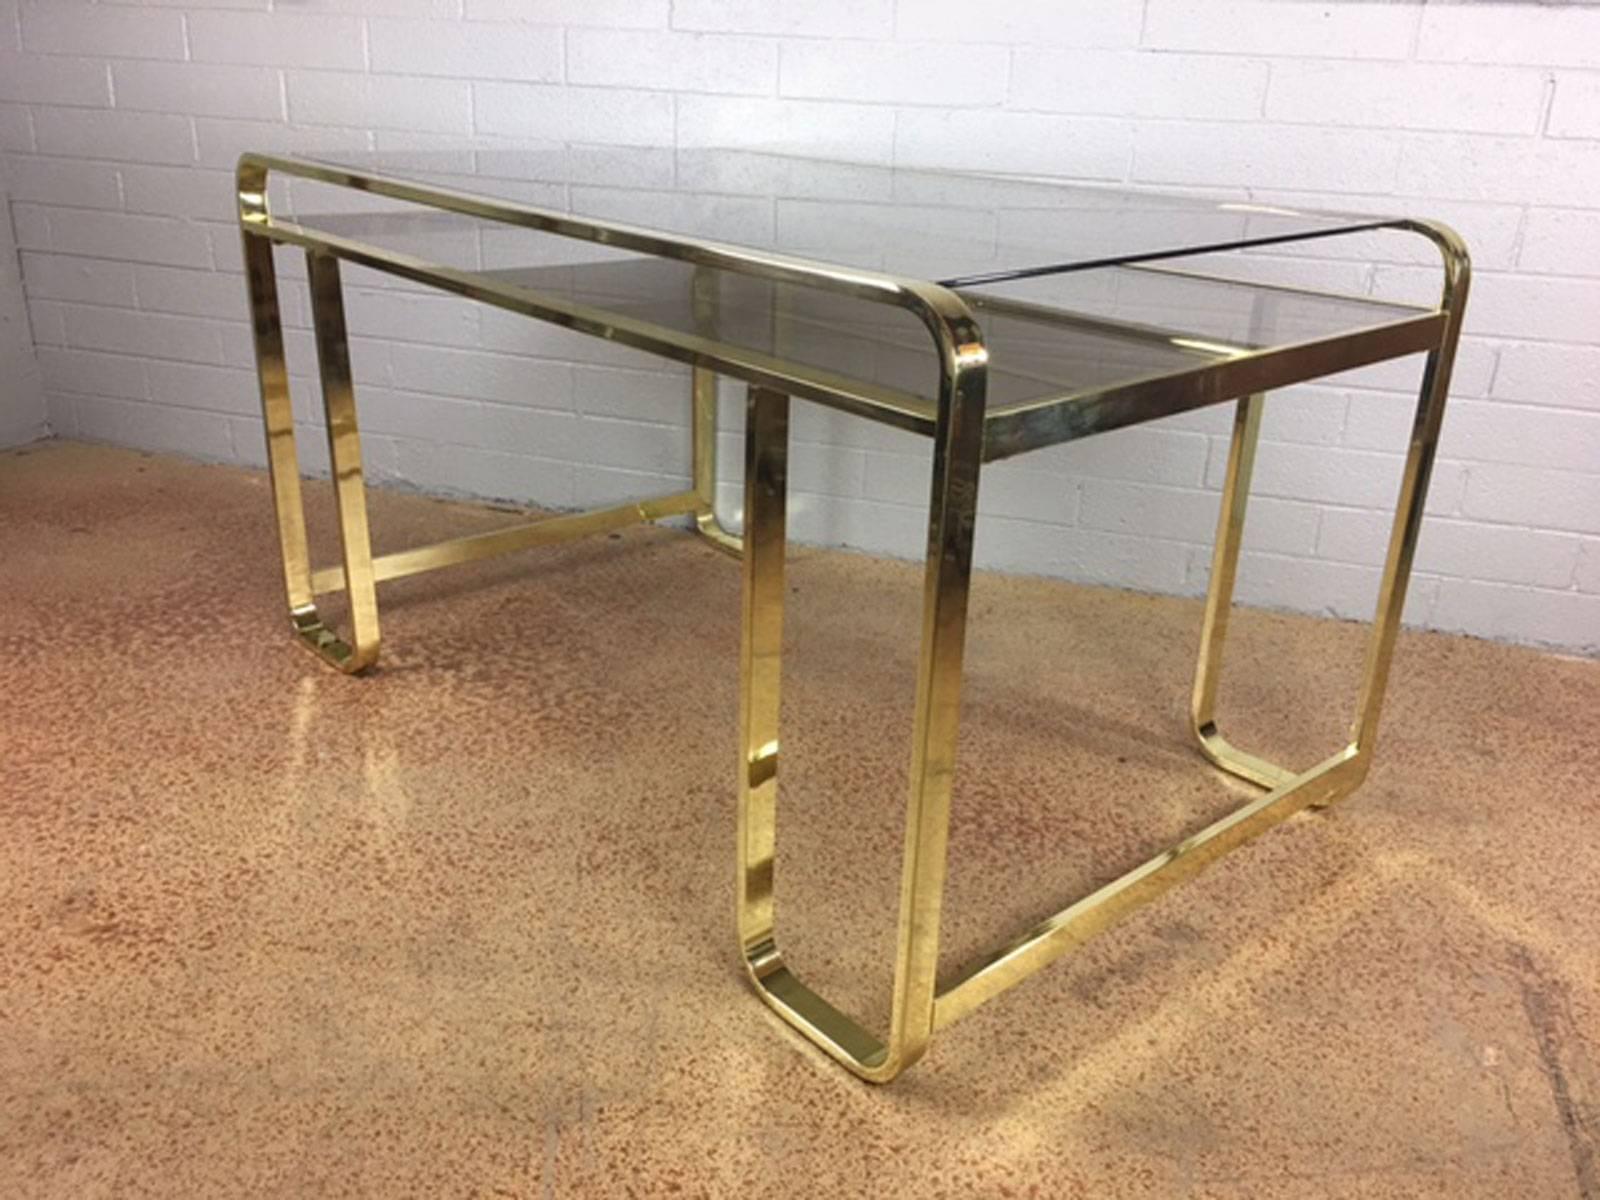 Brass metal finish desk designed by Pierre Cardin for Design Institute of America (DIA). Two levels of smoked inset glass. All glass supports are present. Manufactured in 1983. 

Desk opening area for seating measures 35